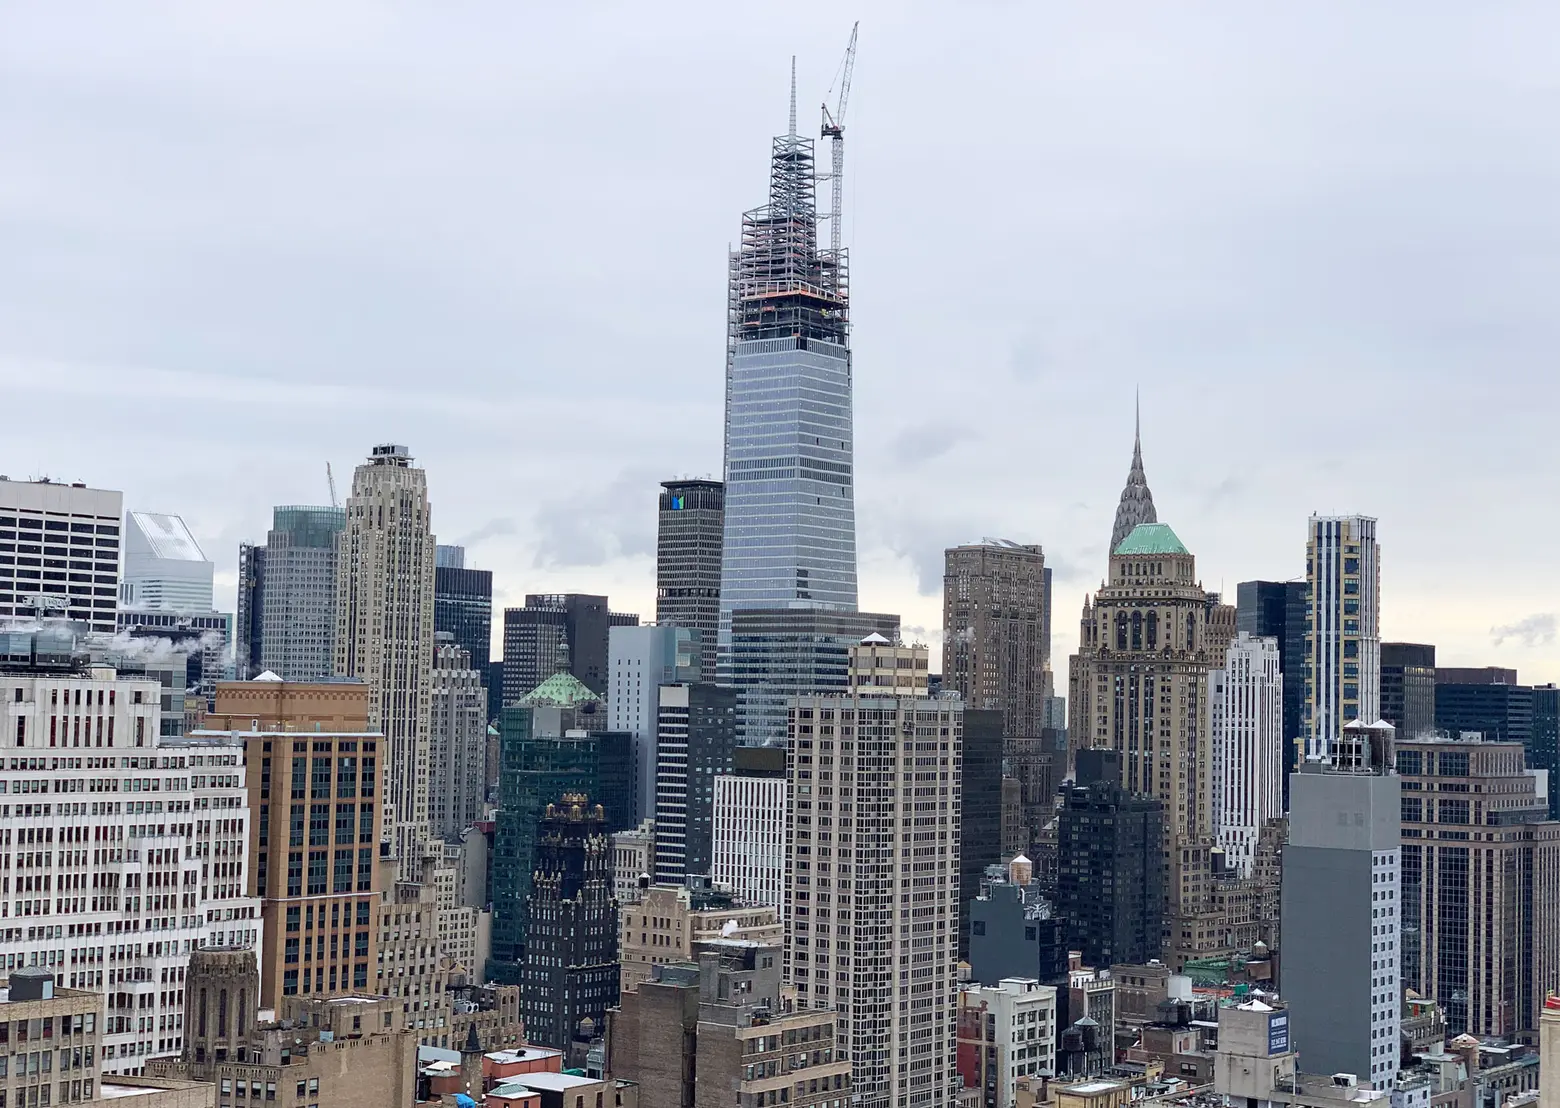 One Vanderbilt’s observation deck named the Summit, will have two glass-floored overhangs